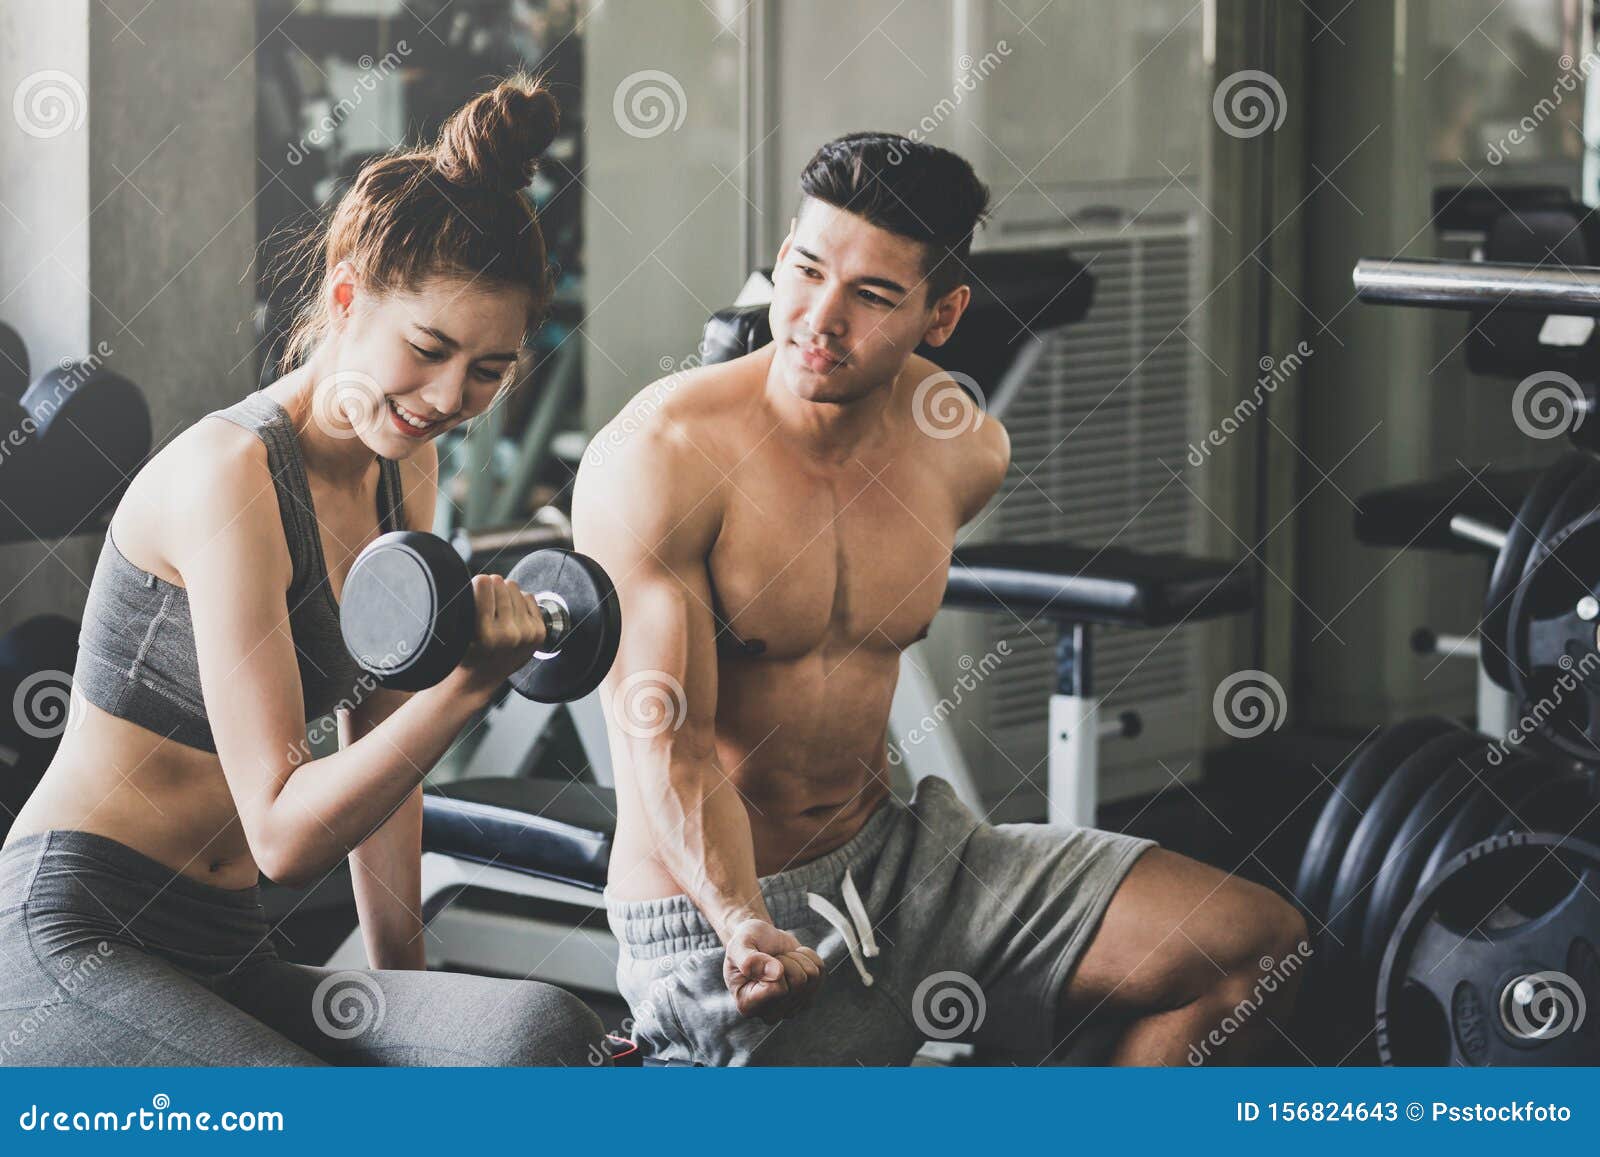 Fitness Man And Woman Doing Exercise In Gym Stock Image - Image of ...